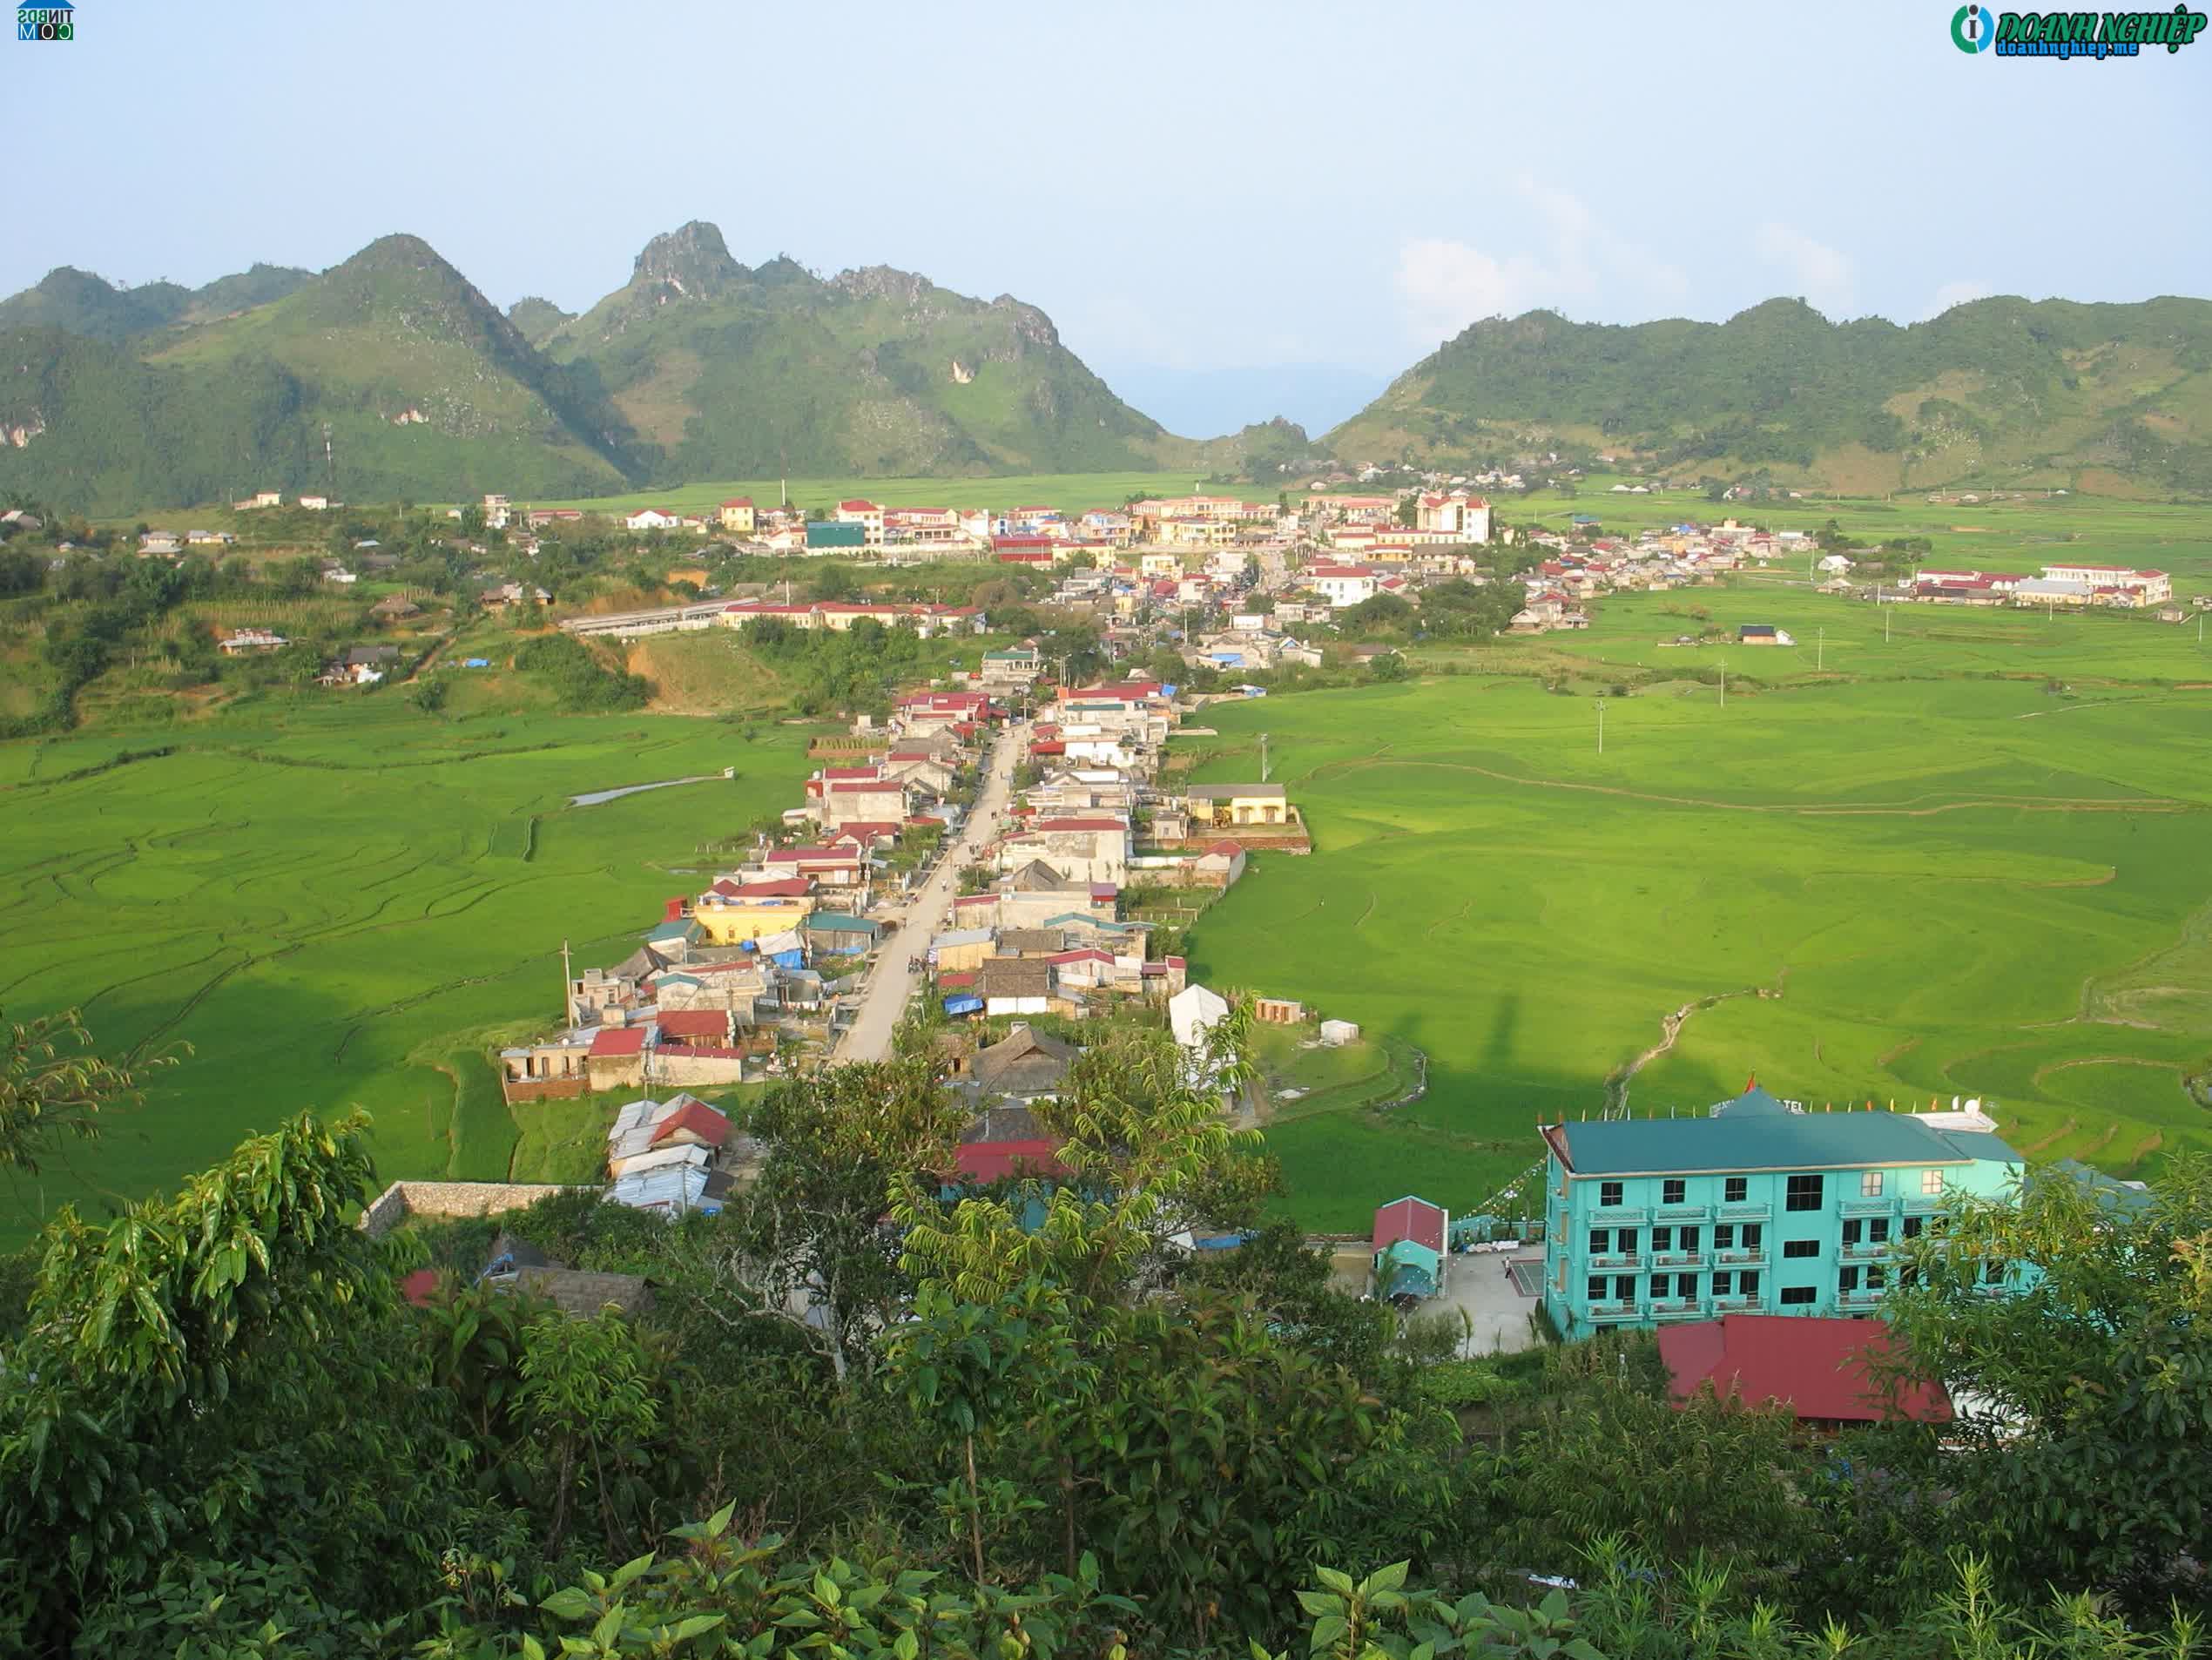 Image of List companies in Sin Ho District- Lai Chau